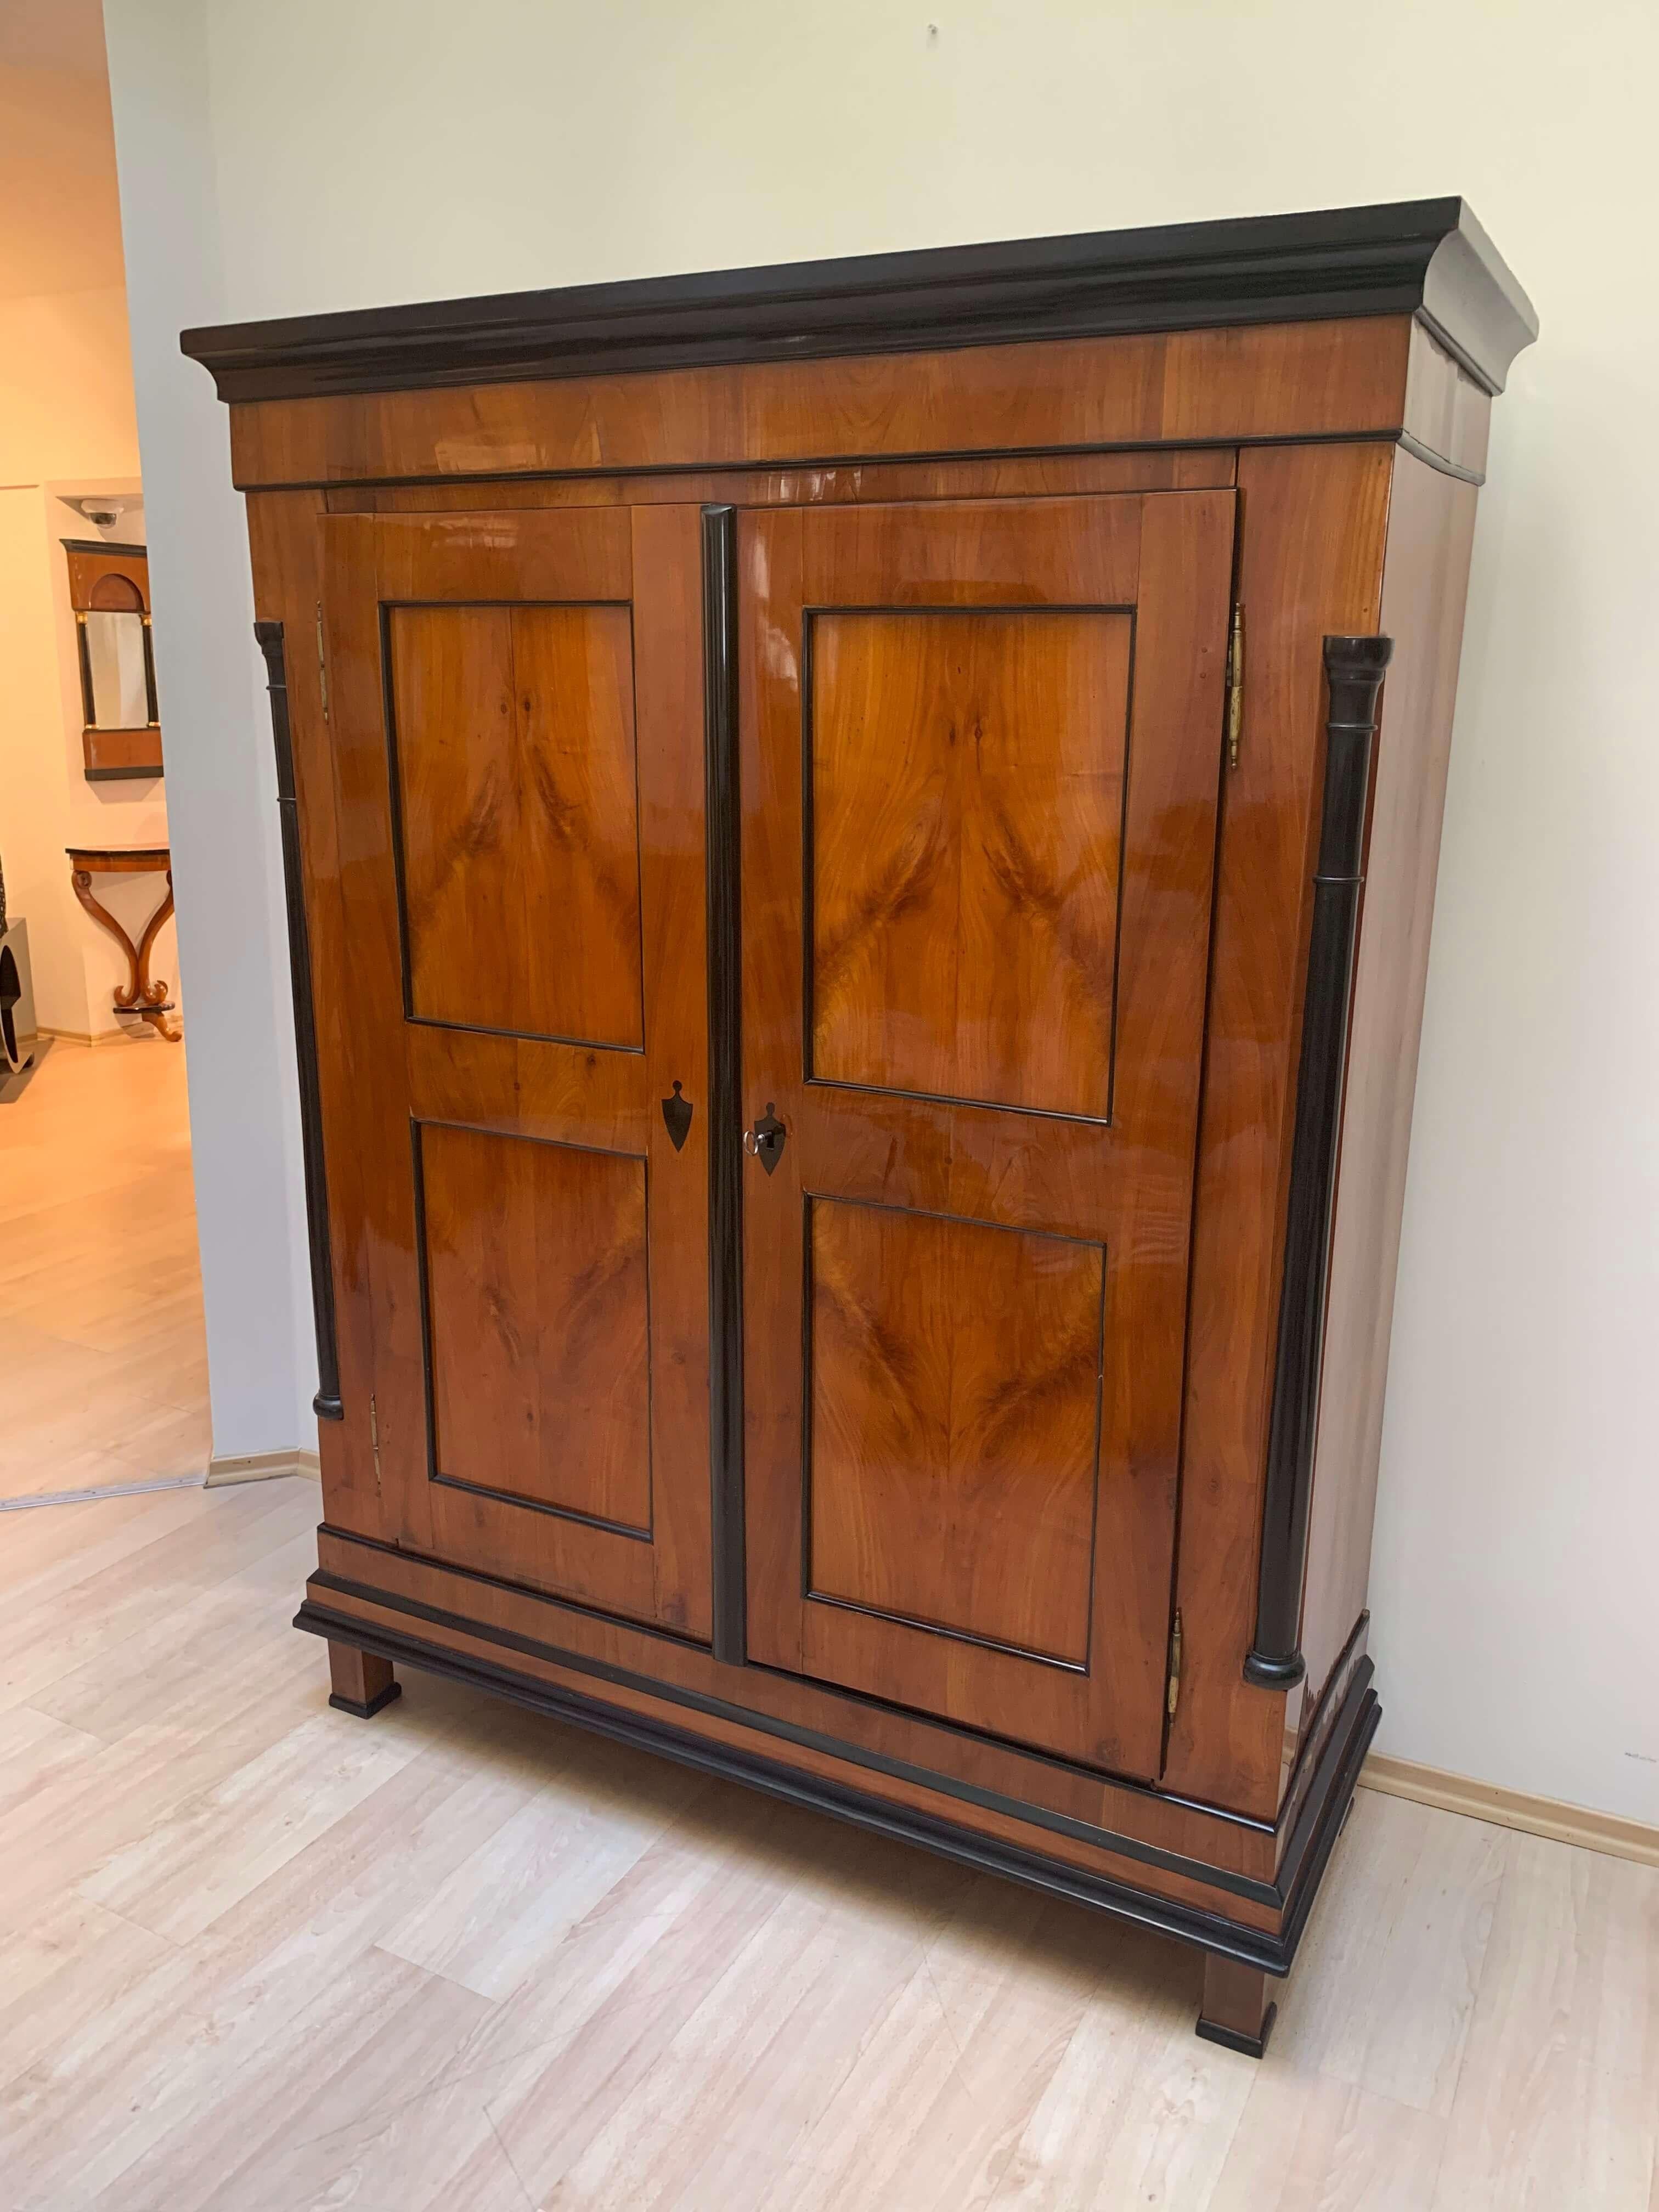 Wonderful two-doored Biedermeier armoire from Franconia, South Germany, circa 1830

The framework is made of cherry solid wood. At the frontside, it has four cherry veneer fillings with an amazing and book-matched grain. 
The half-columns at the